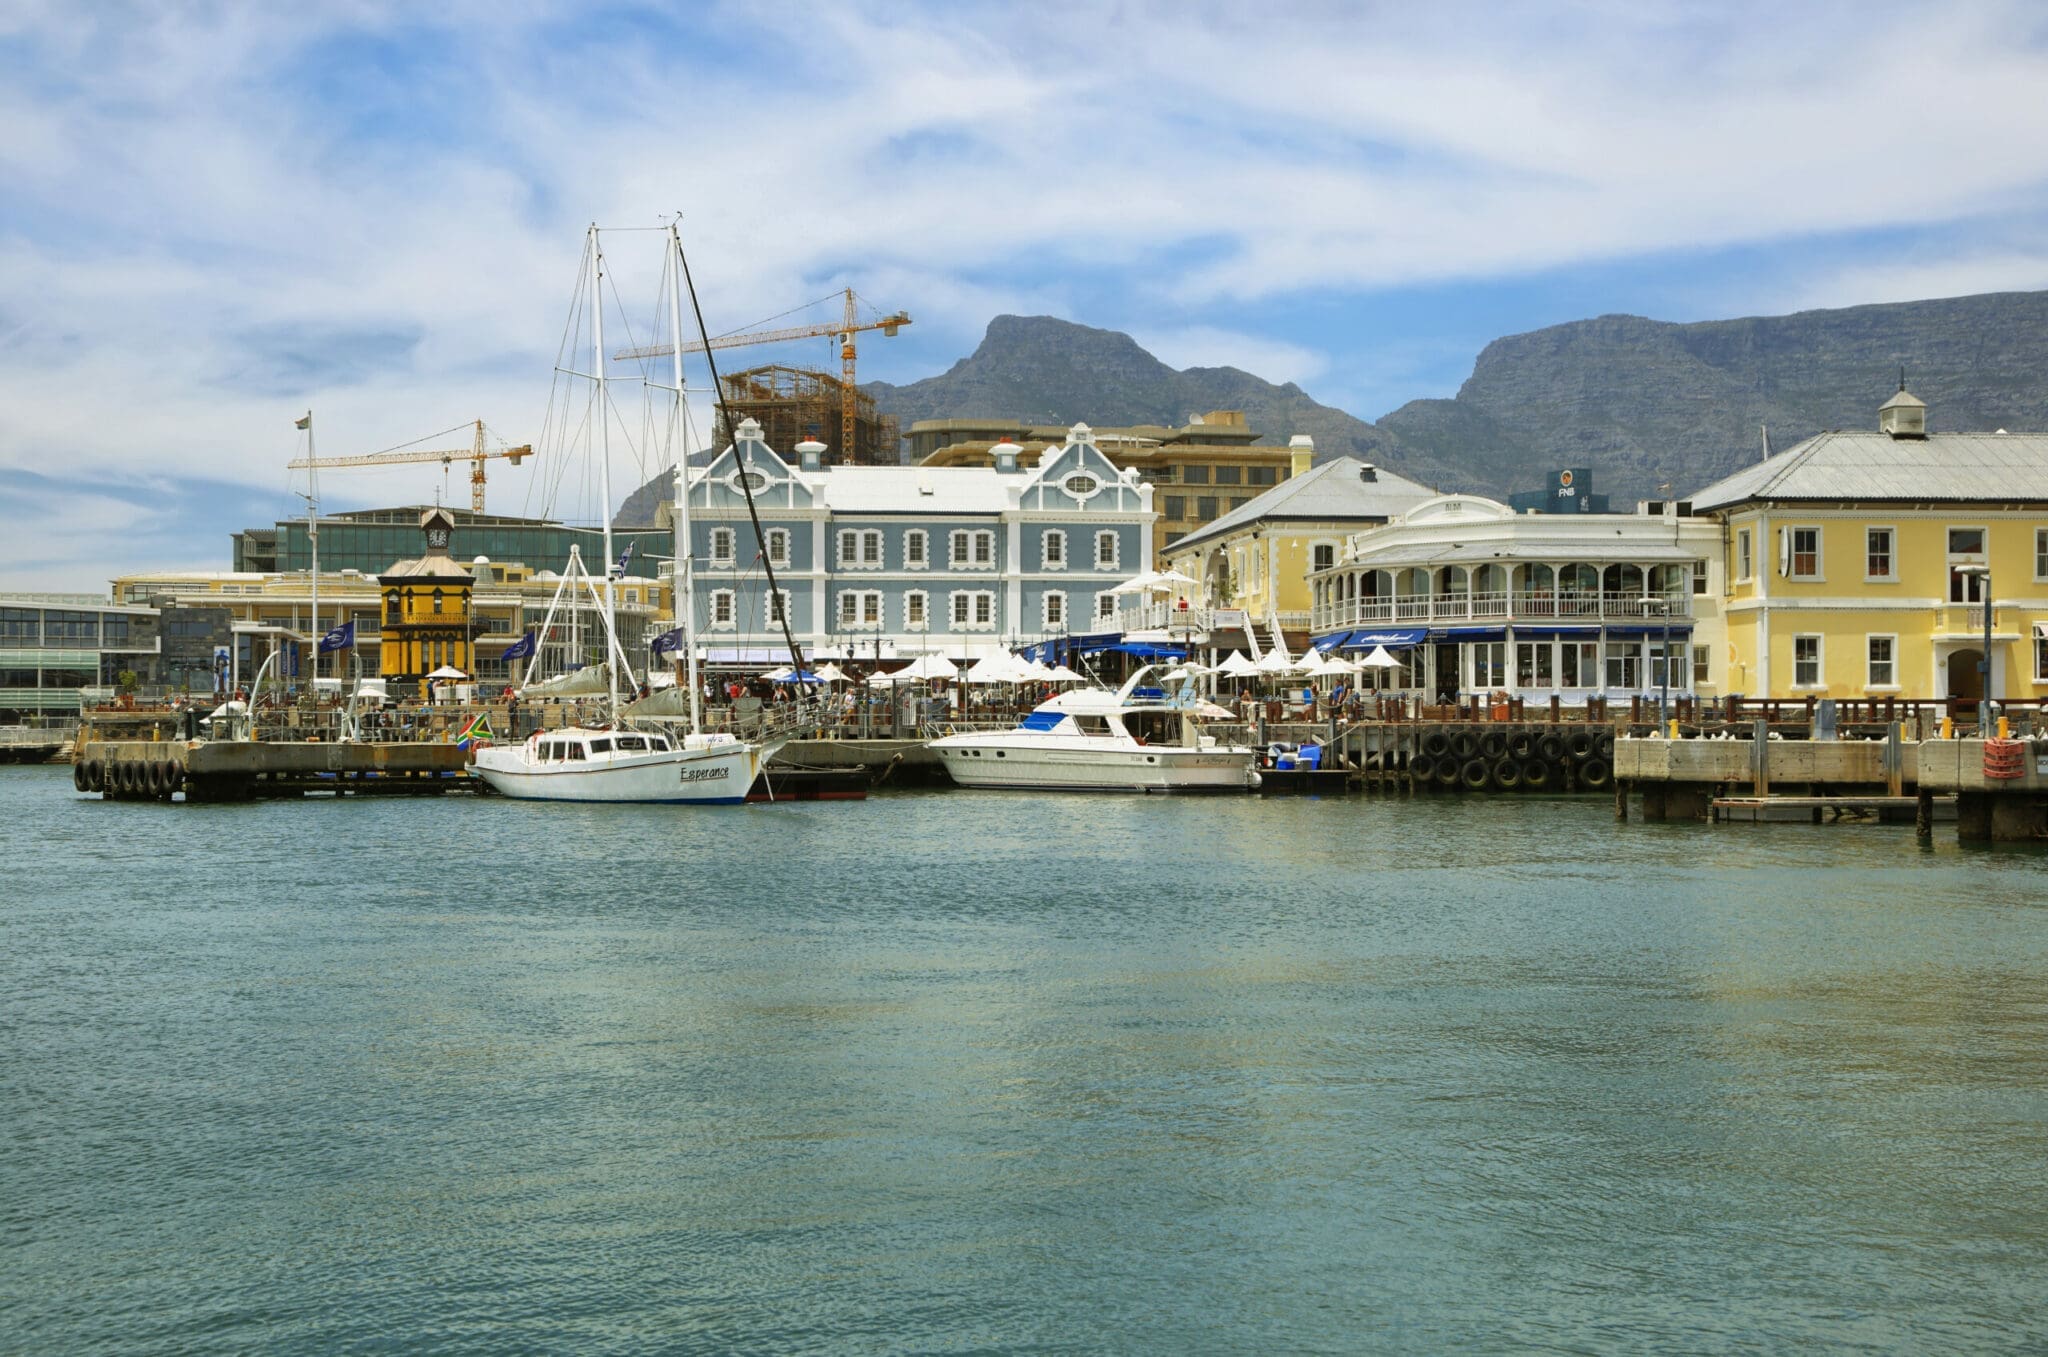 CAPE TOWN,SOUTH AFRICA-DECEMBER, 29:Victoria and Alfred Waterfront, harbor with recreation boats, shops, restaurants and Table Mountain on background on December 7, 2014  in Cape Town, South Africa.